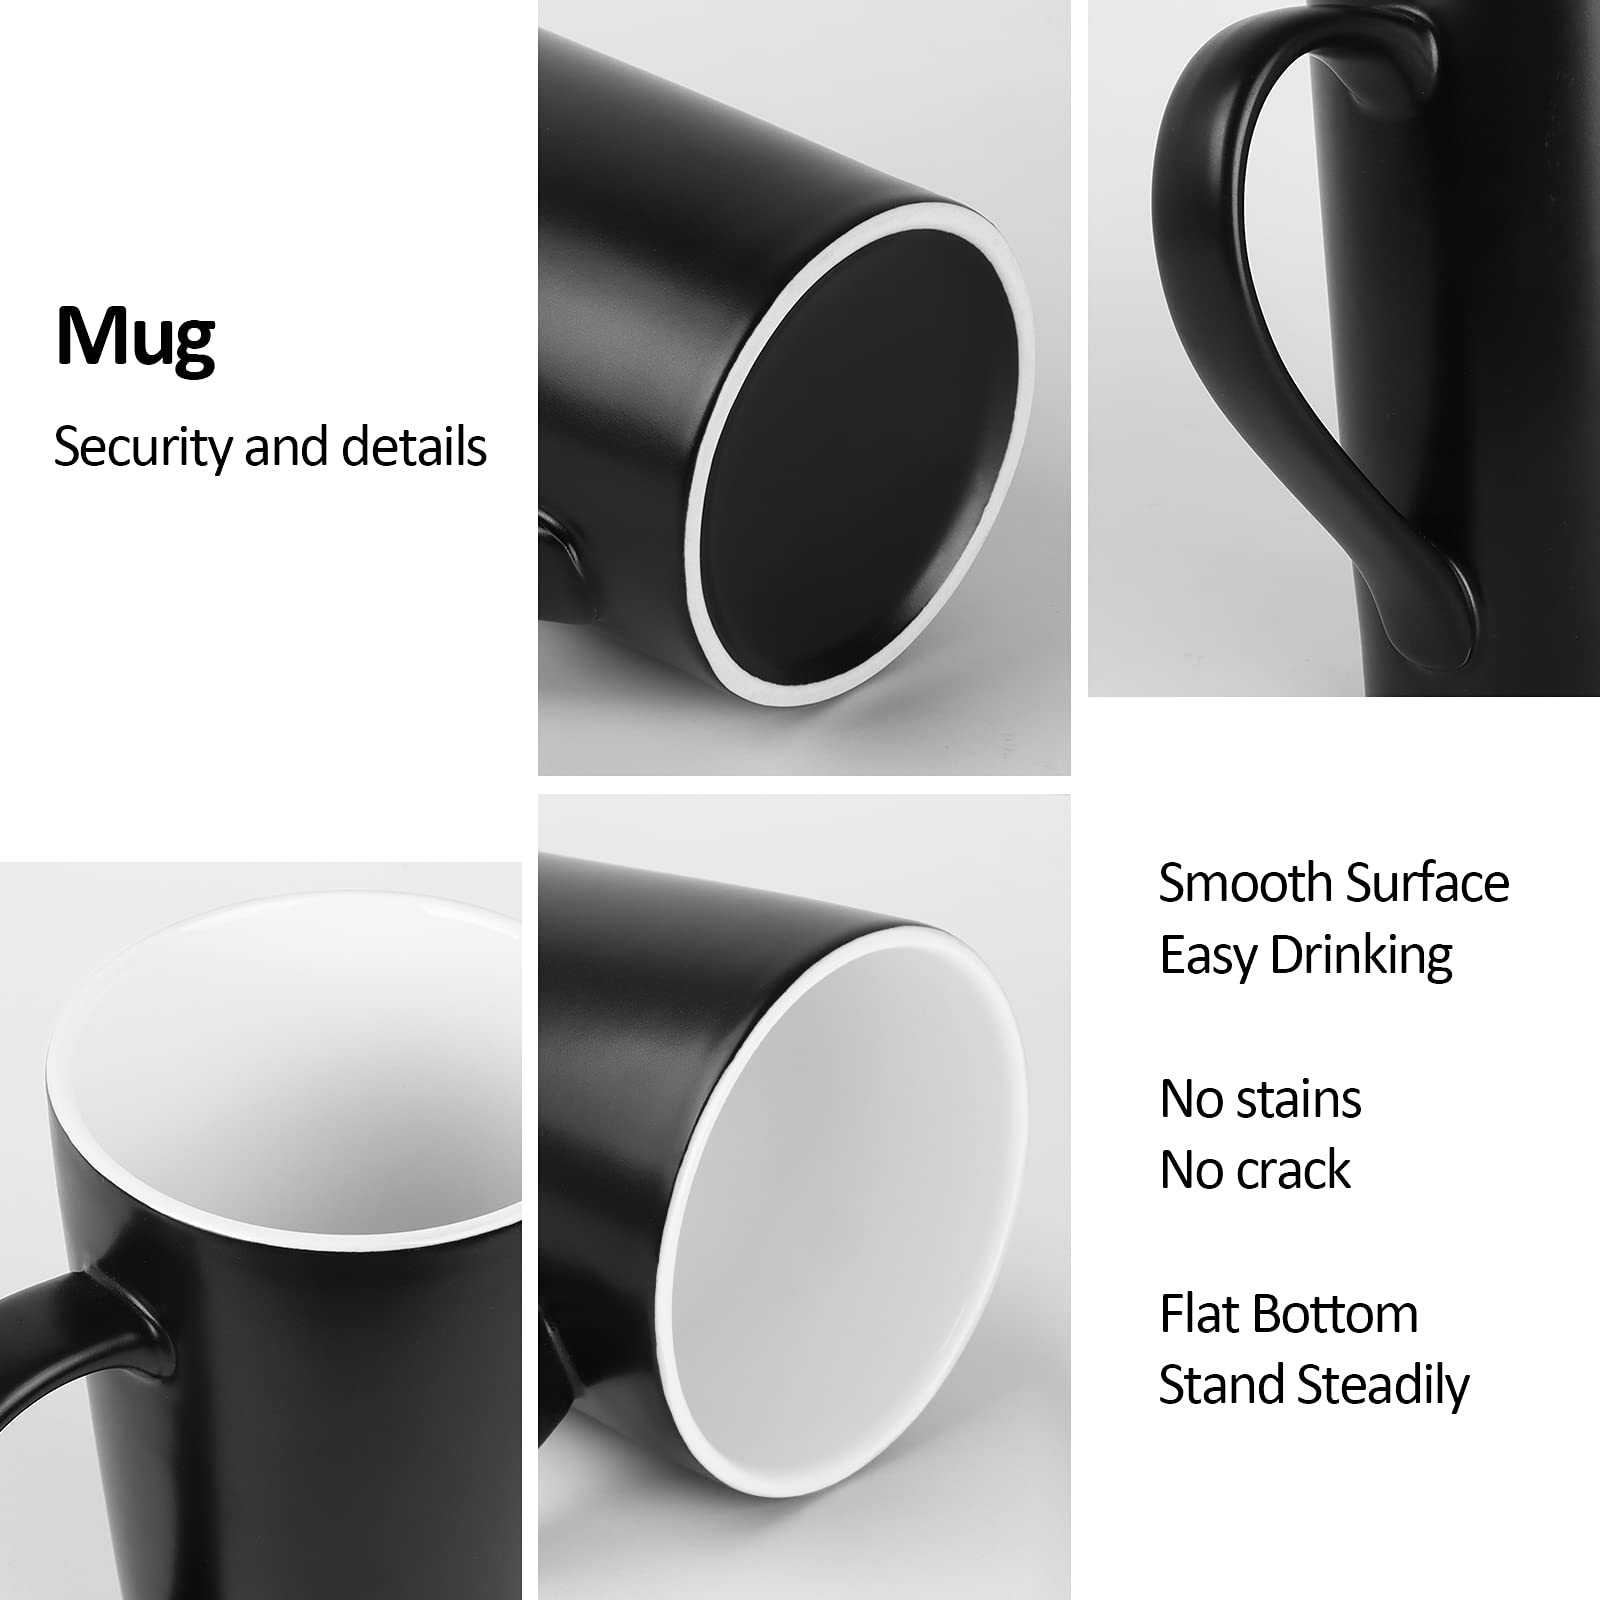 20 OZ Coffee Mug, Simple Large Tall Ceramic Cup, Harebe Smooth Ceramic Tea Cup for Office and Home, The Best Gift for Your Father, Husband And Friends, Big Capacity with Handle, Black